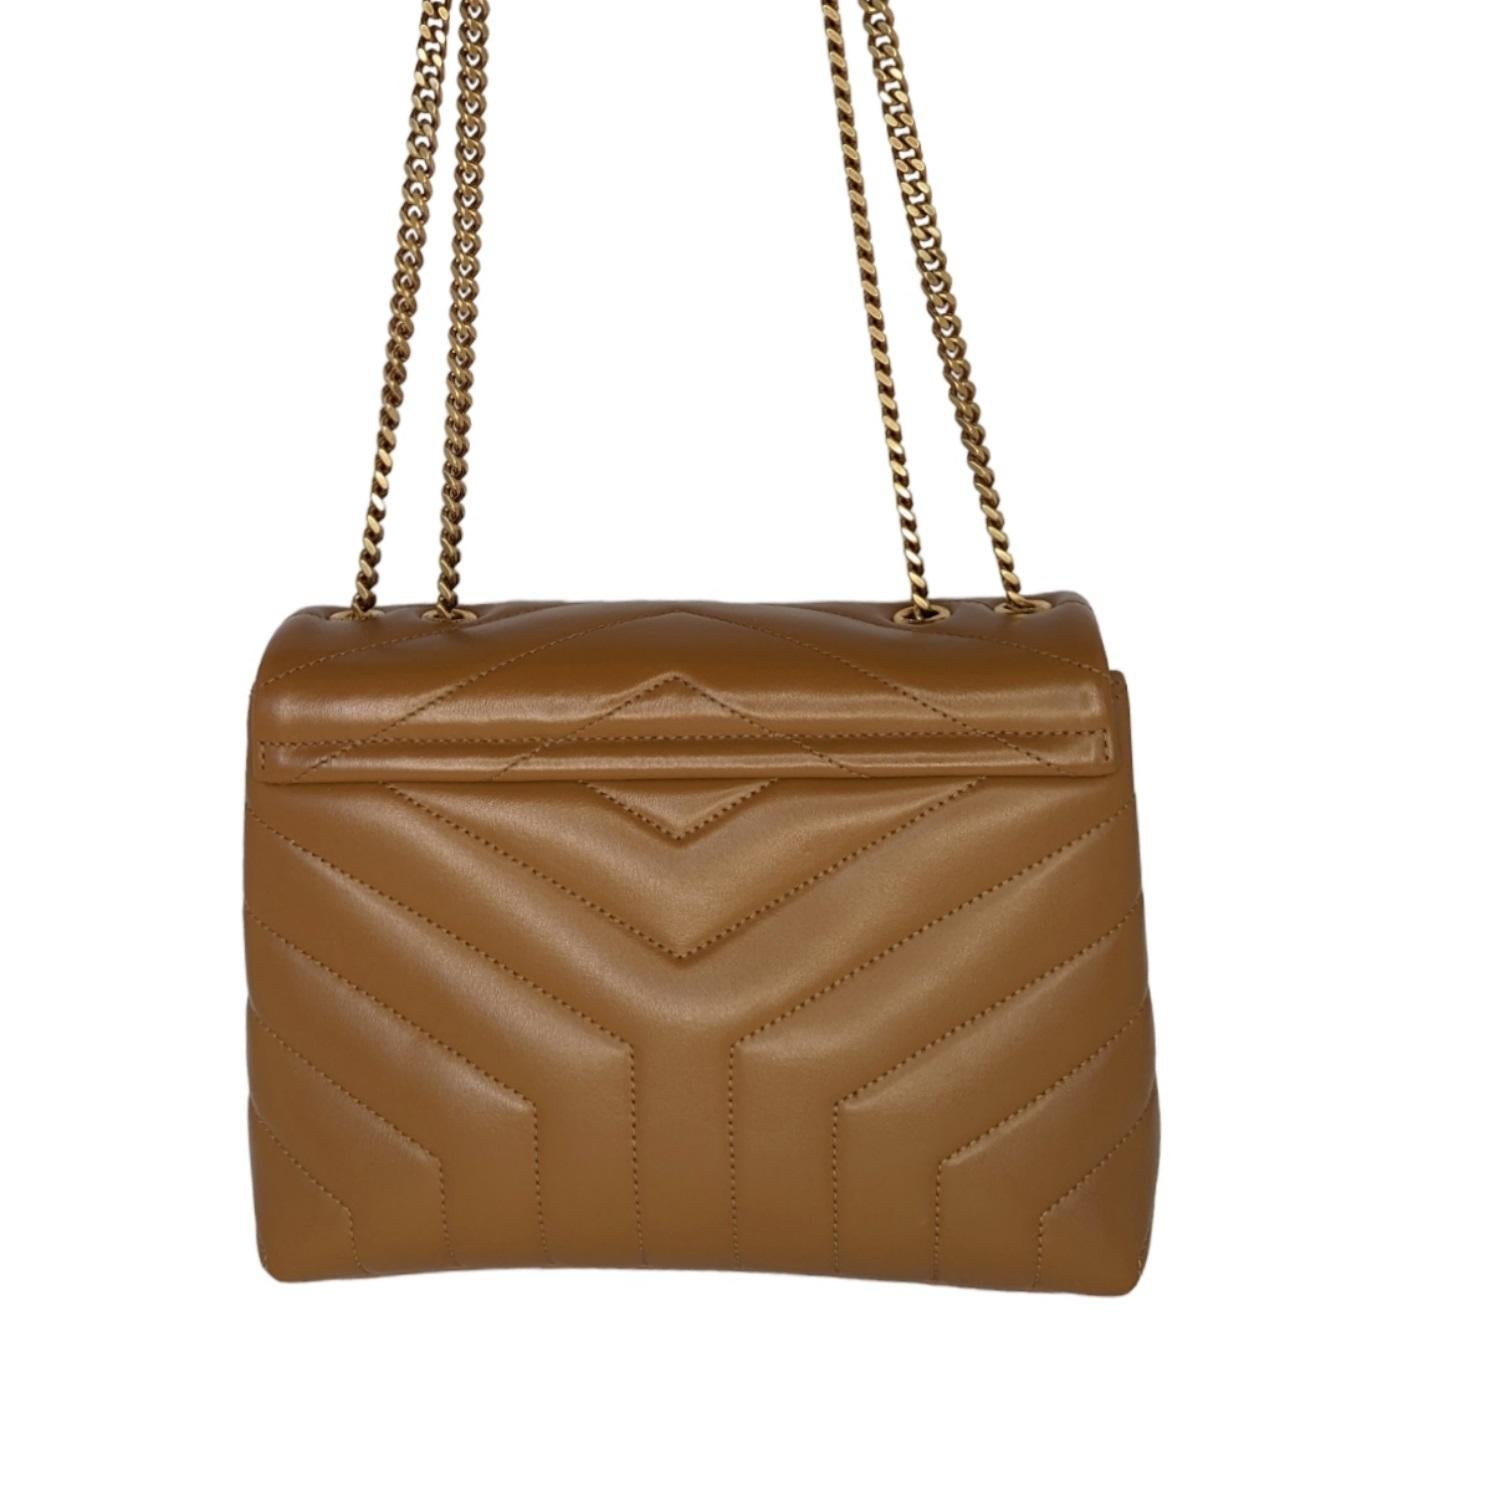 Saint Laurent Small Loulou Matelassé Leather Shoulder Bag with front flap, featuring the Cassandre, a leather and metal chain strap that can be worn doubled on the shoulder and y-quilted overstitching. Made in Italy. Retail price $2,950.

Designer: